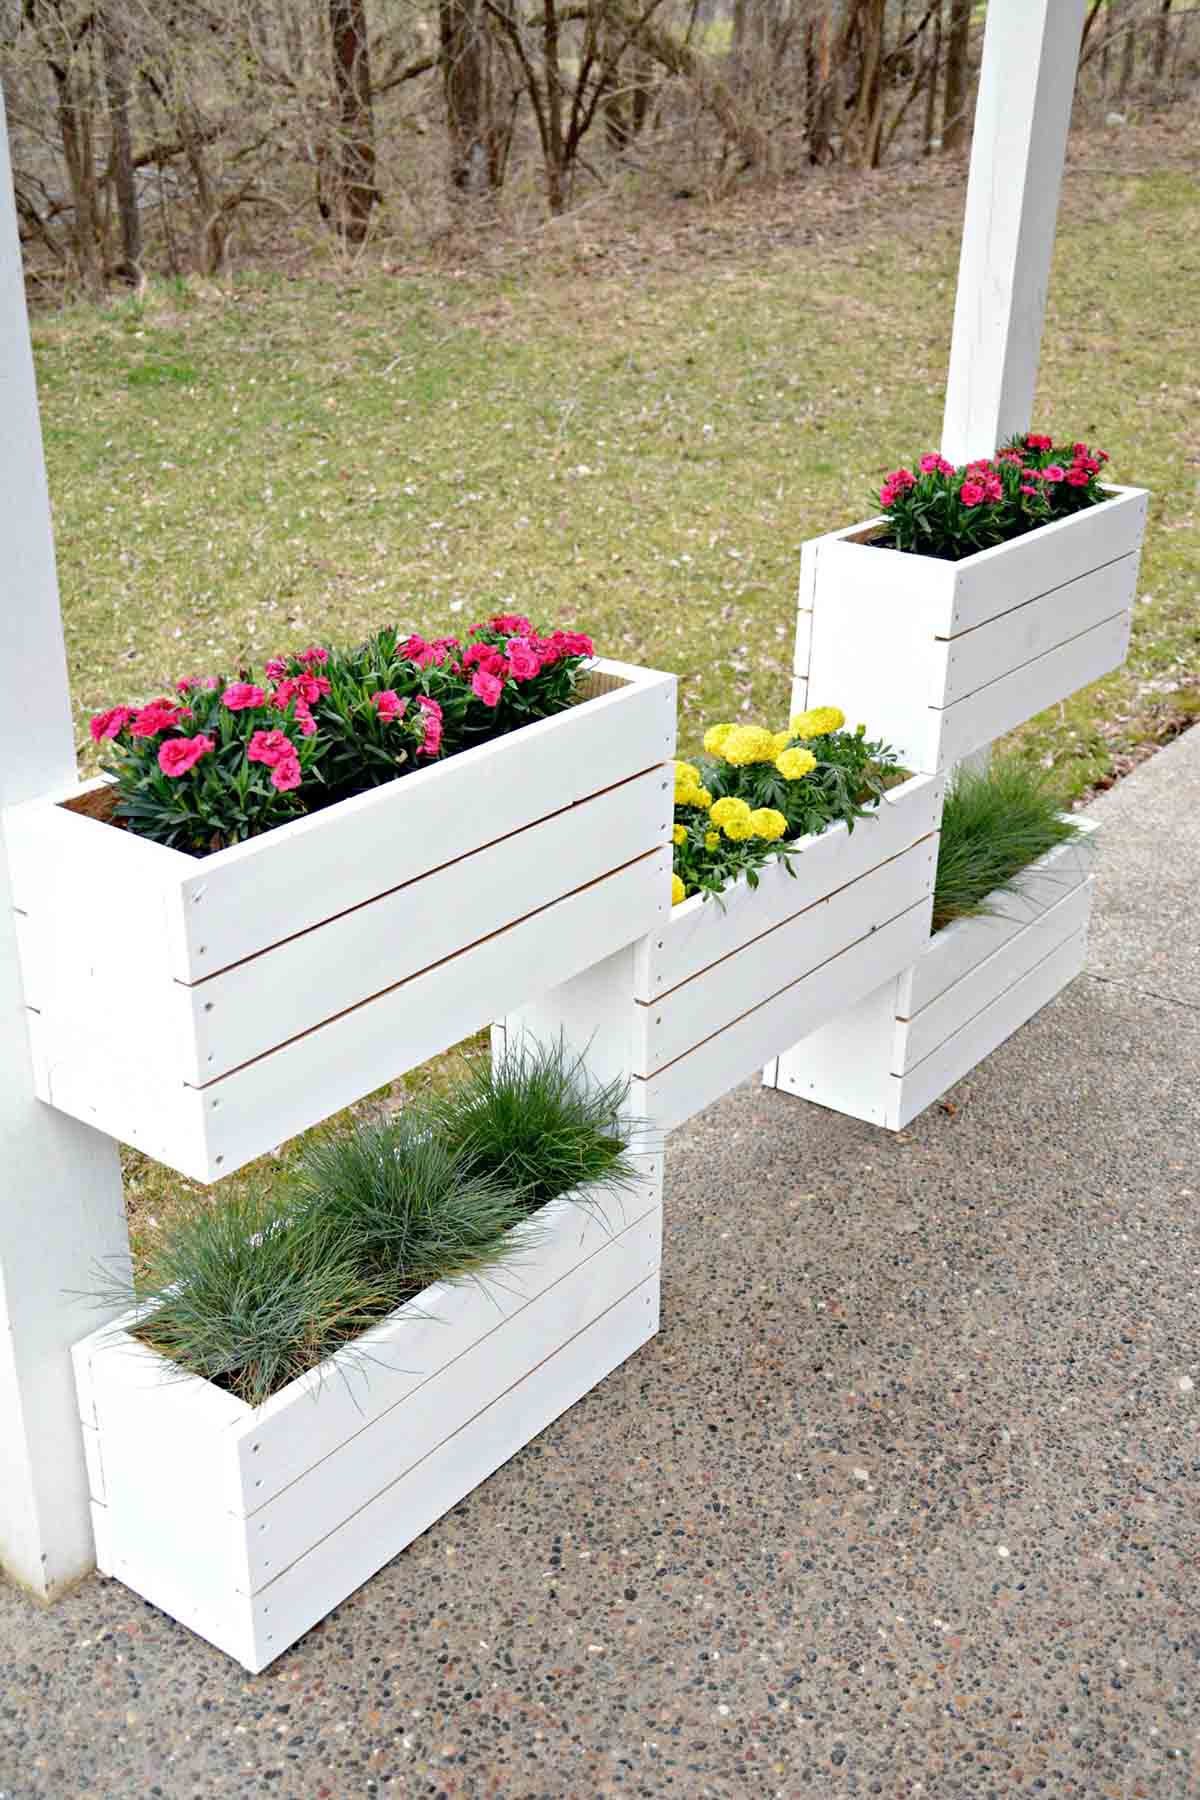 33 Best Built-In Planter Ideas and Designs for 2017